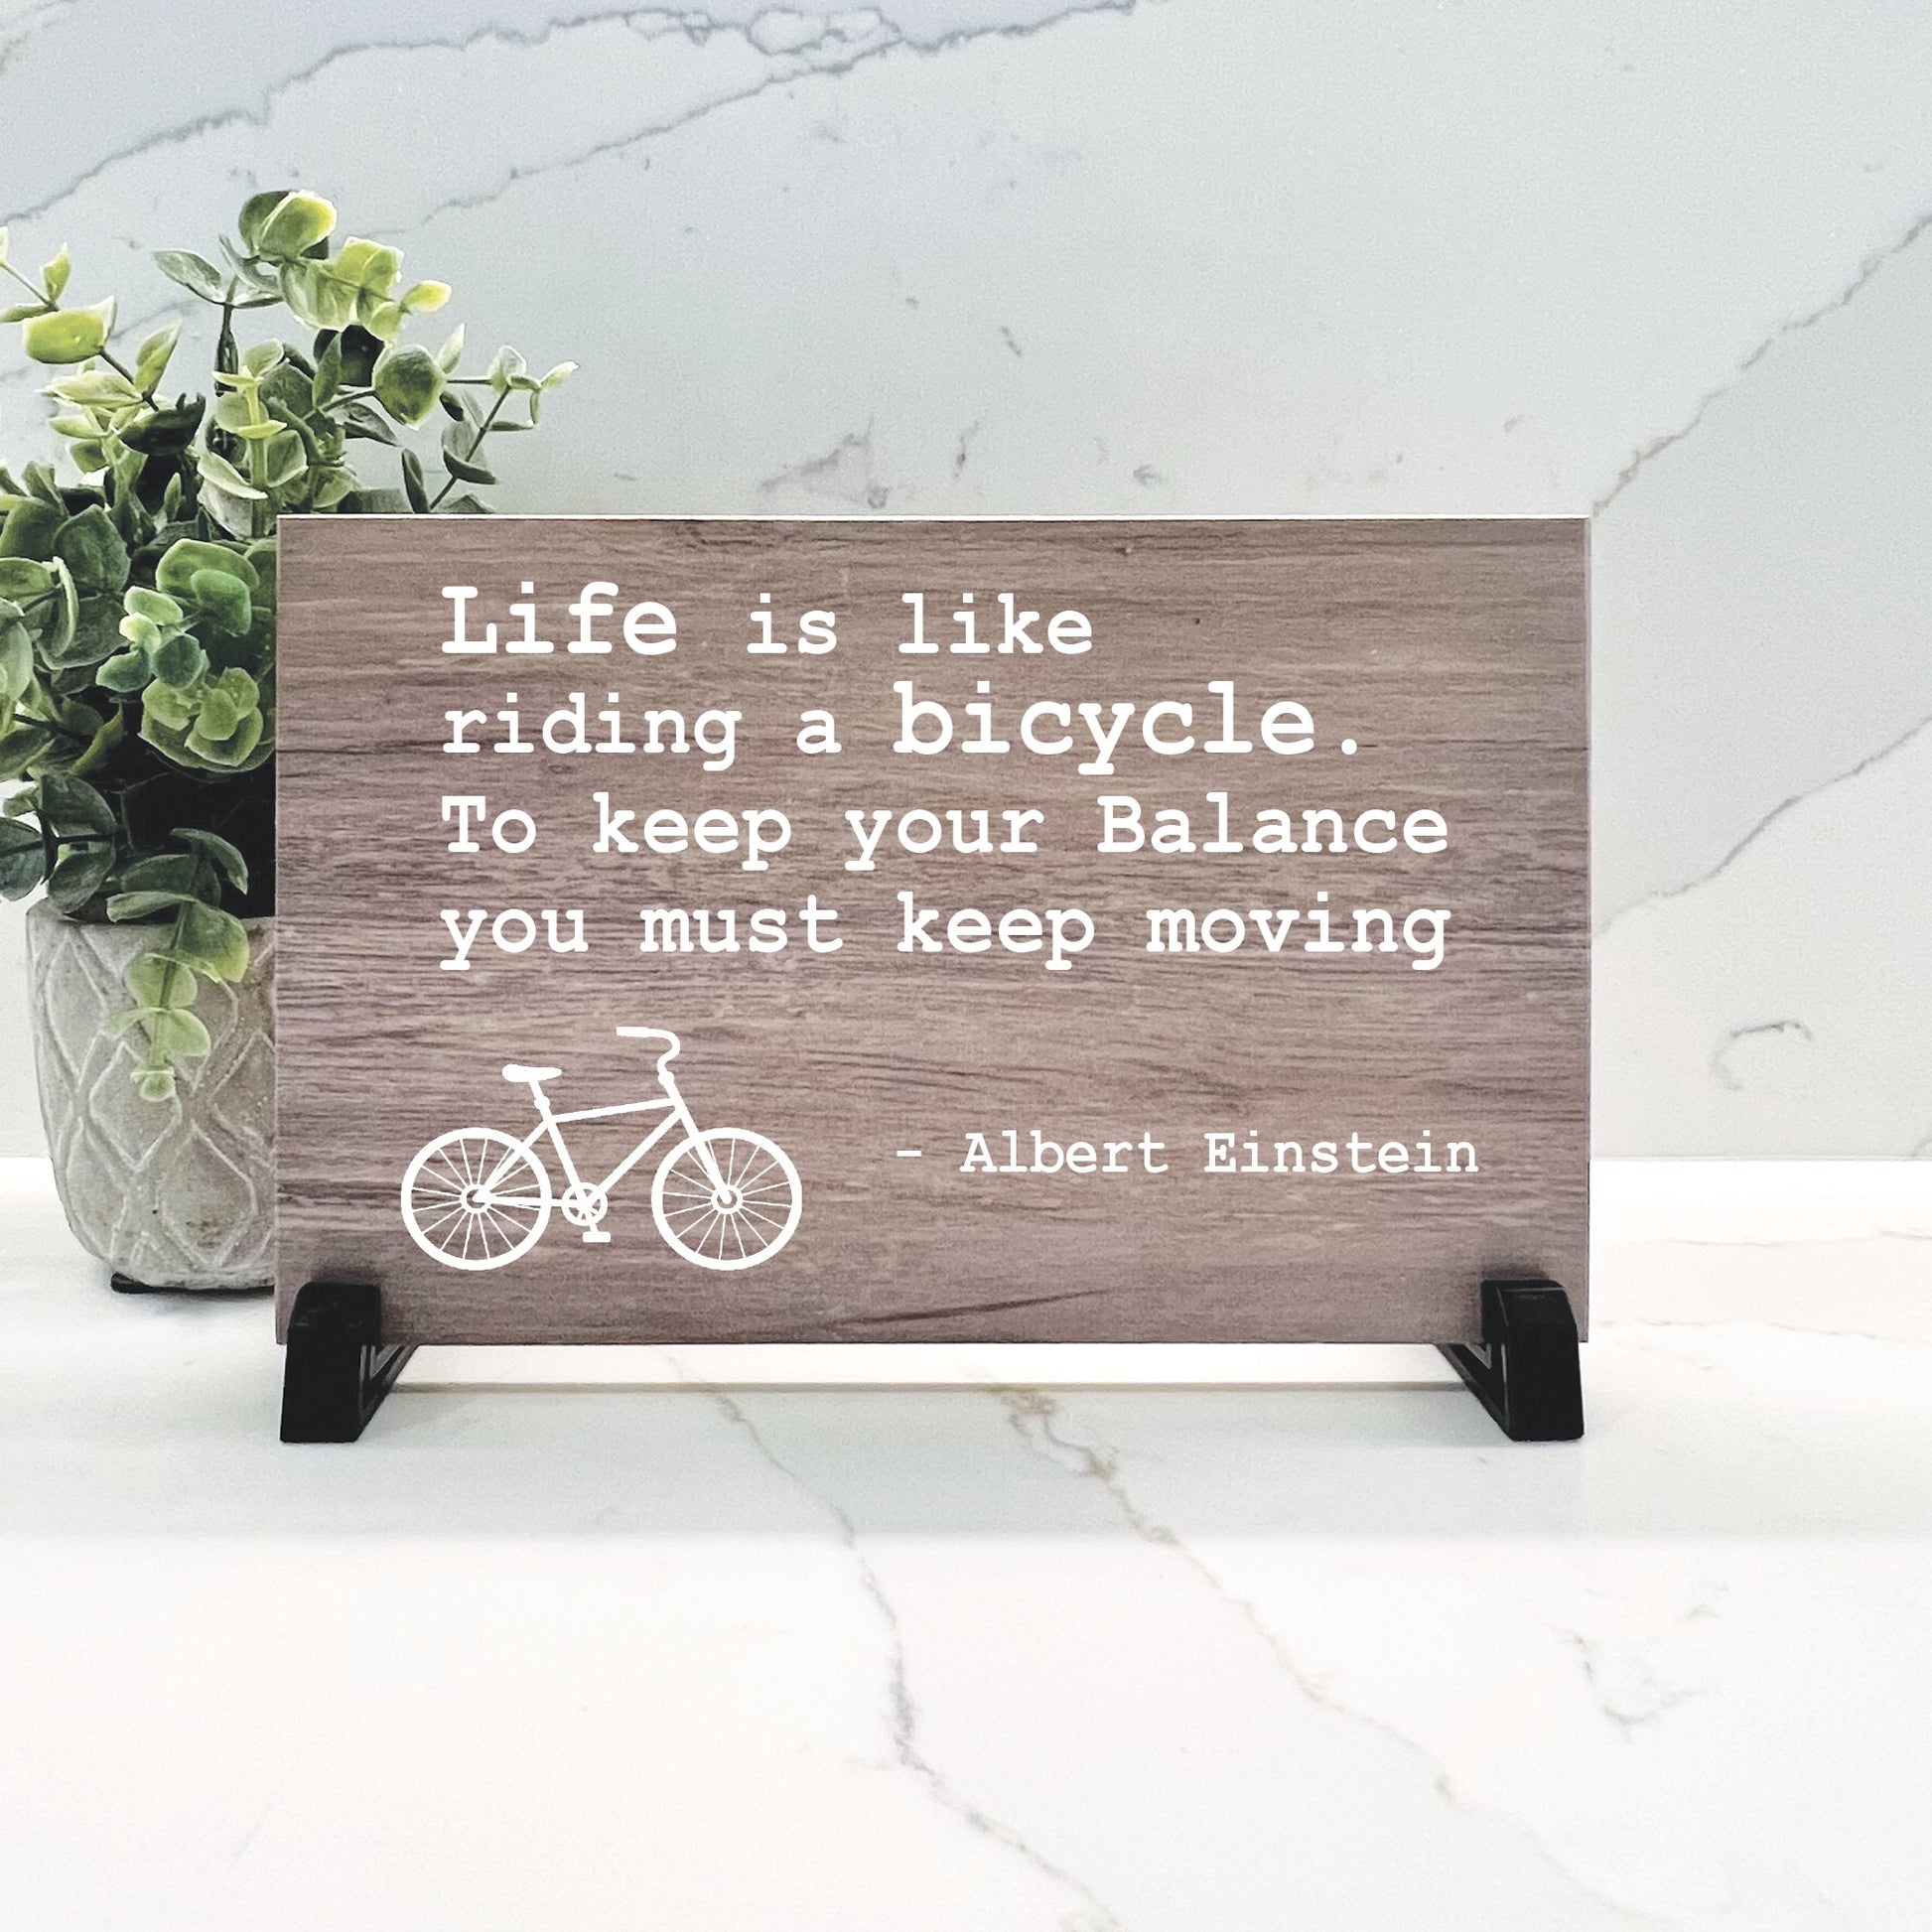 Life is like riding a bicycle. To keep your balance you must keep moving - Albert Einstein Quote - Choice of wood color - Inspirational sign